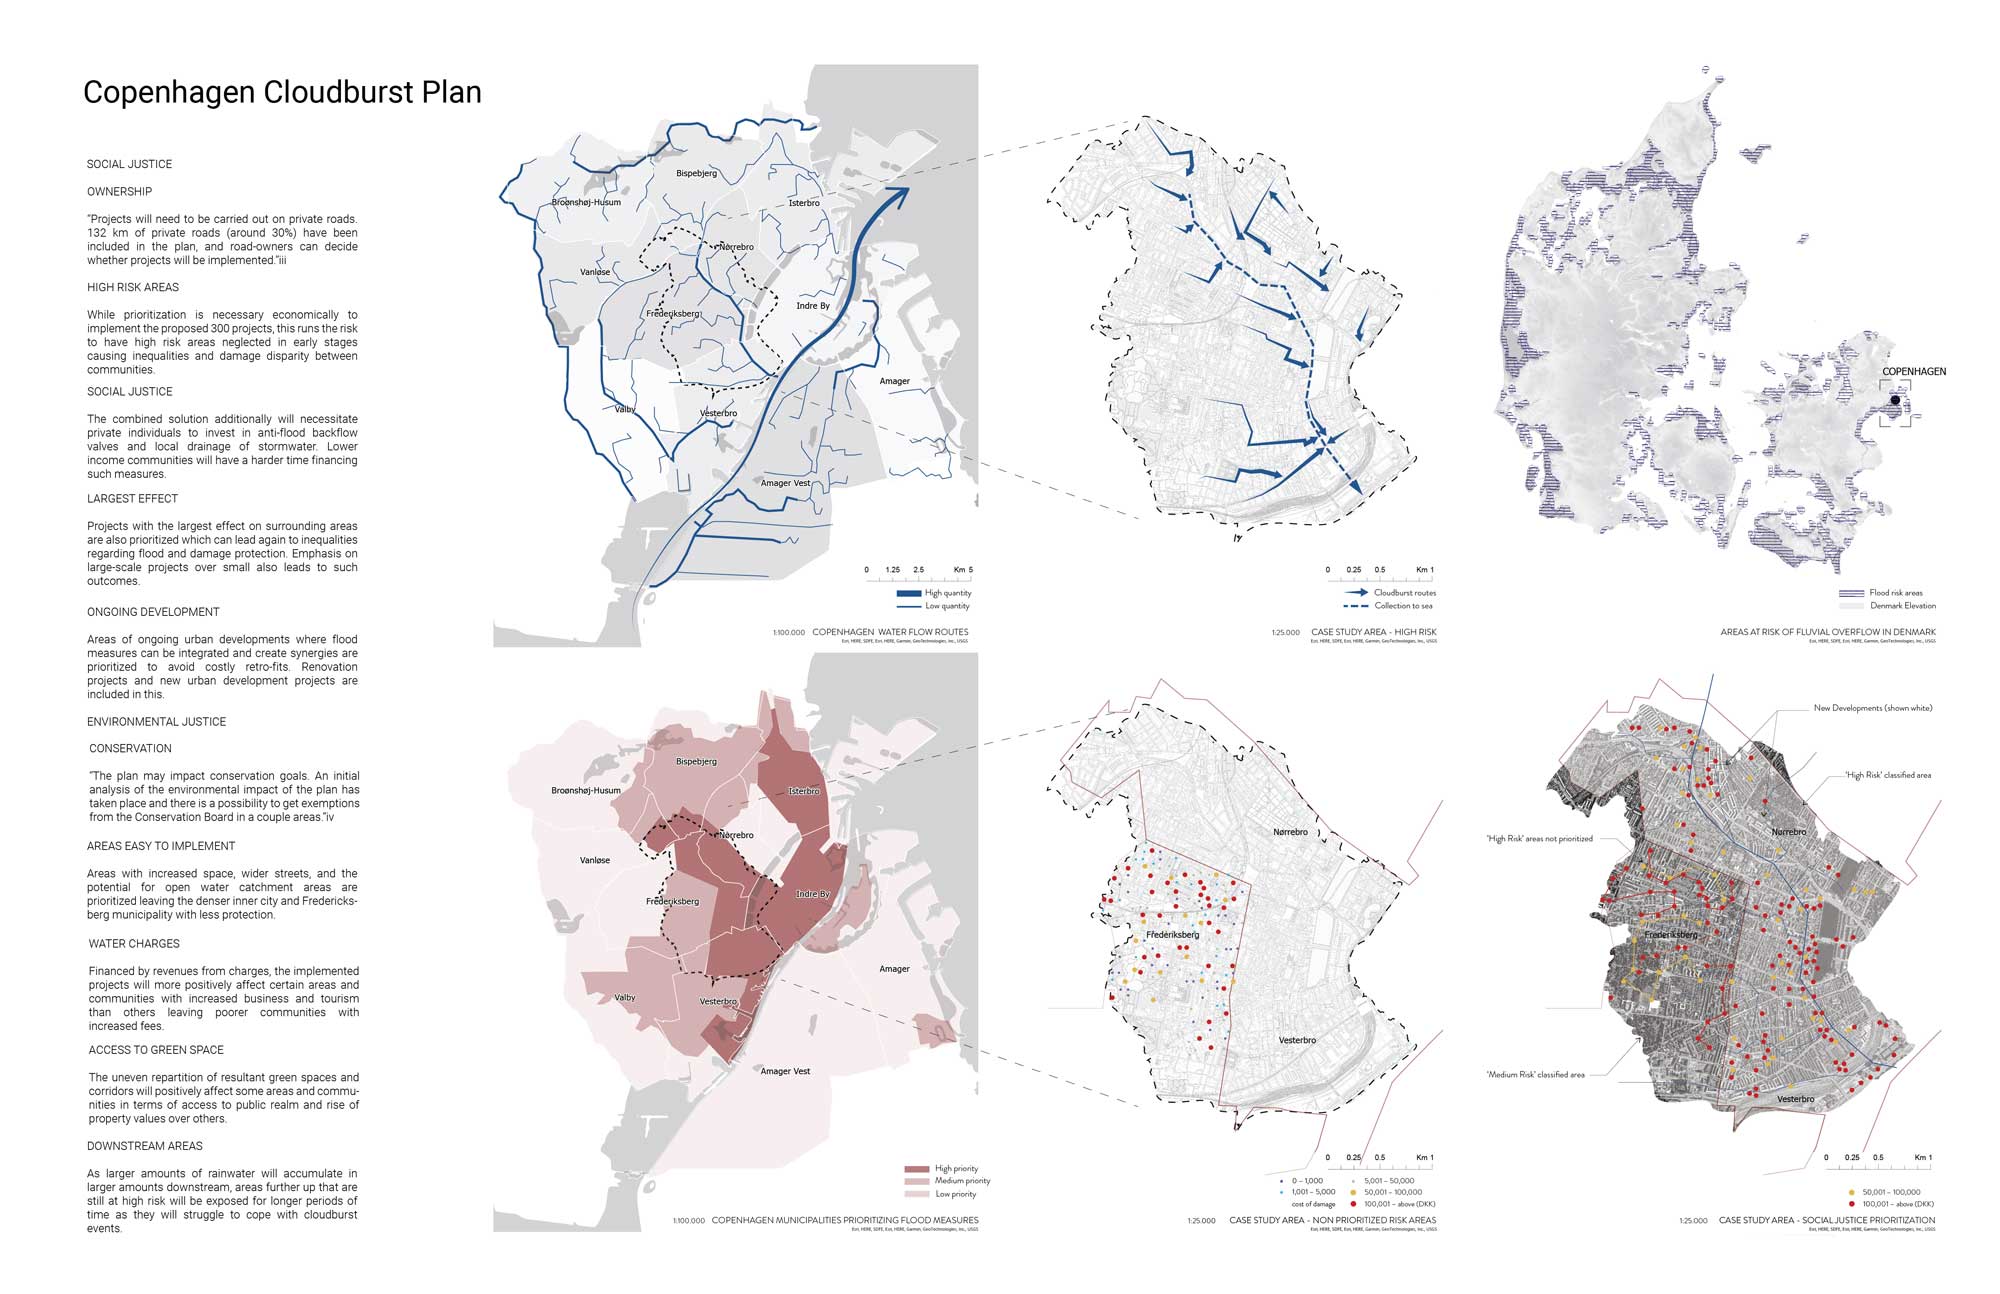 A series of maps of Copenhagen showing data related to development and environmental risk.